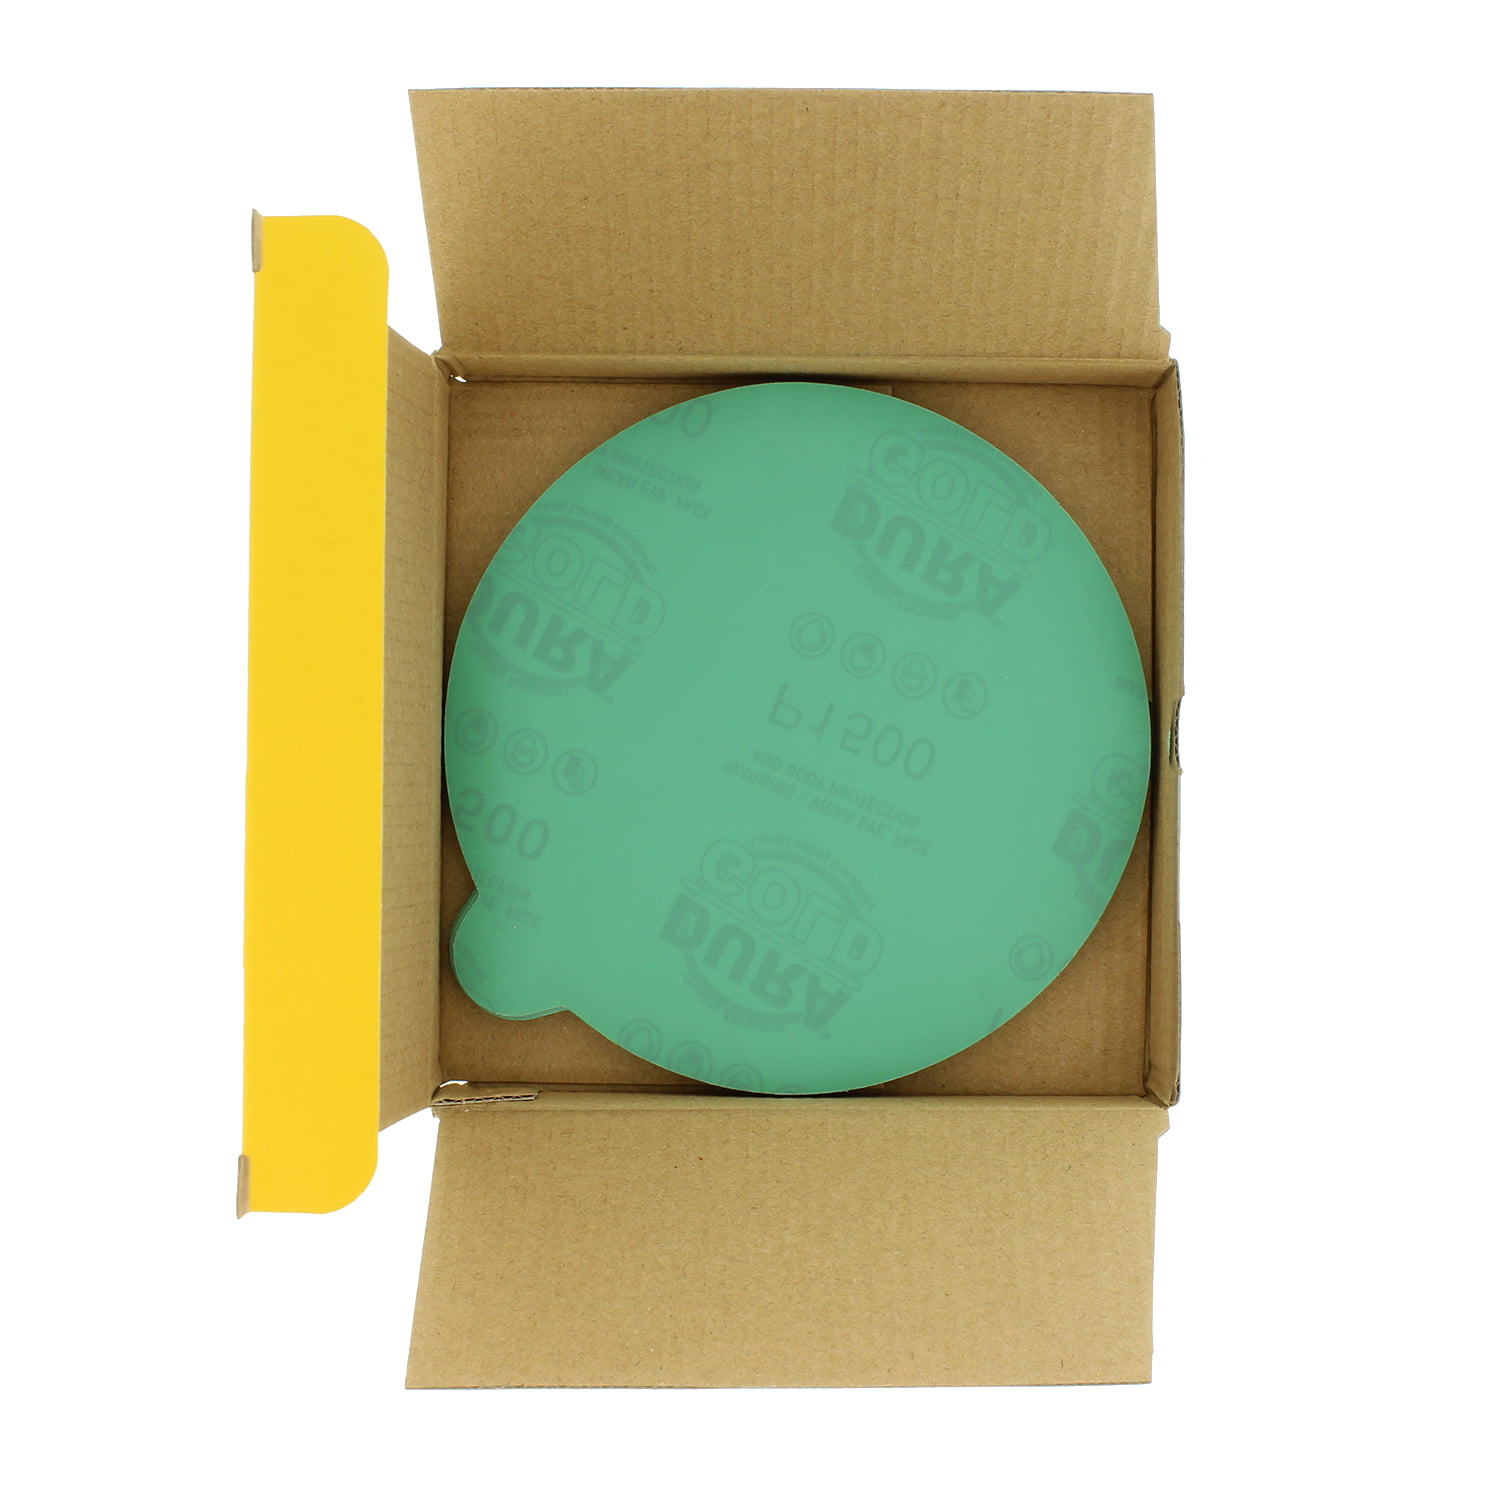 Premium Film Back Dura-Gold 1500 Grit 6 Green Film Box of 25 Sandpaper Finishing Discs for Automotive and Woodworking PSA Self Adhesive Stickyback Sanding Discs for DA Sanders 